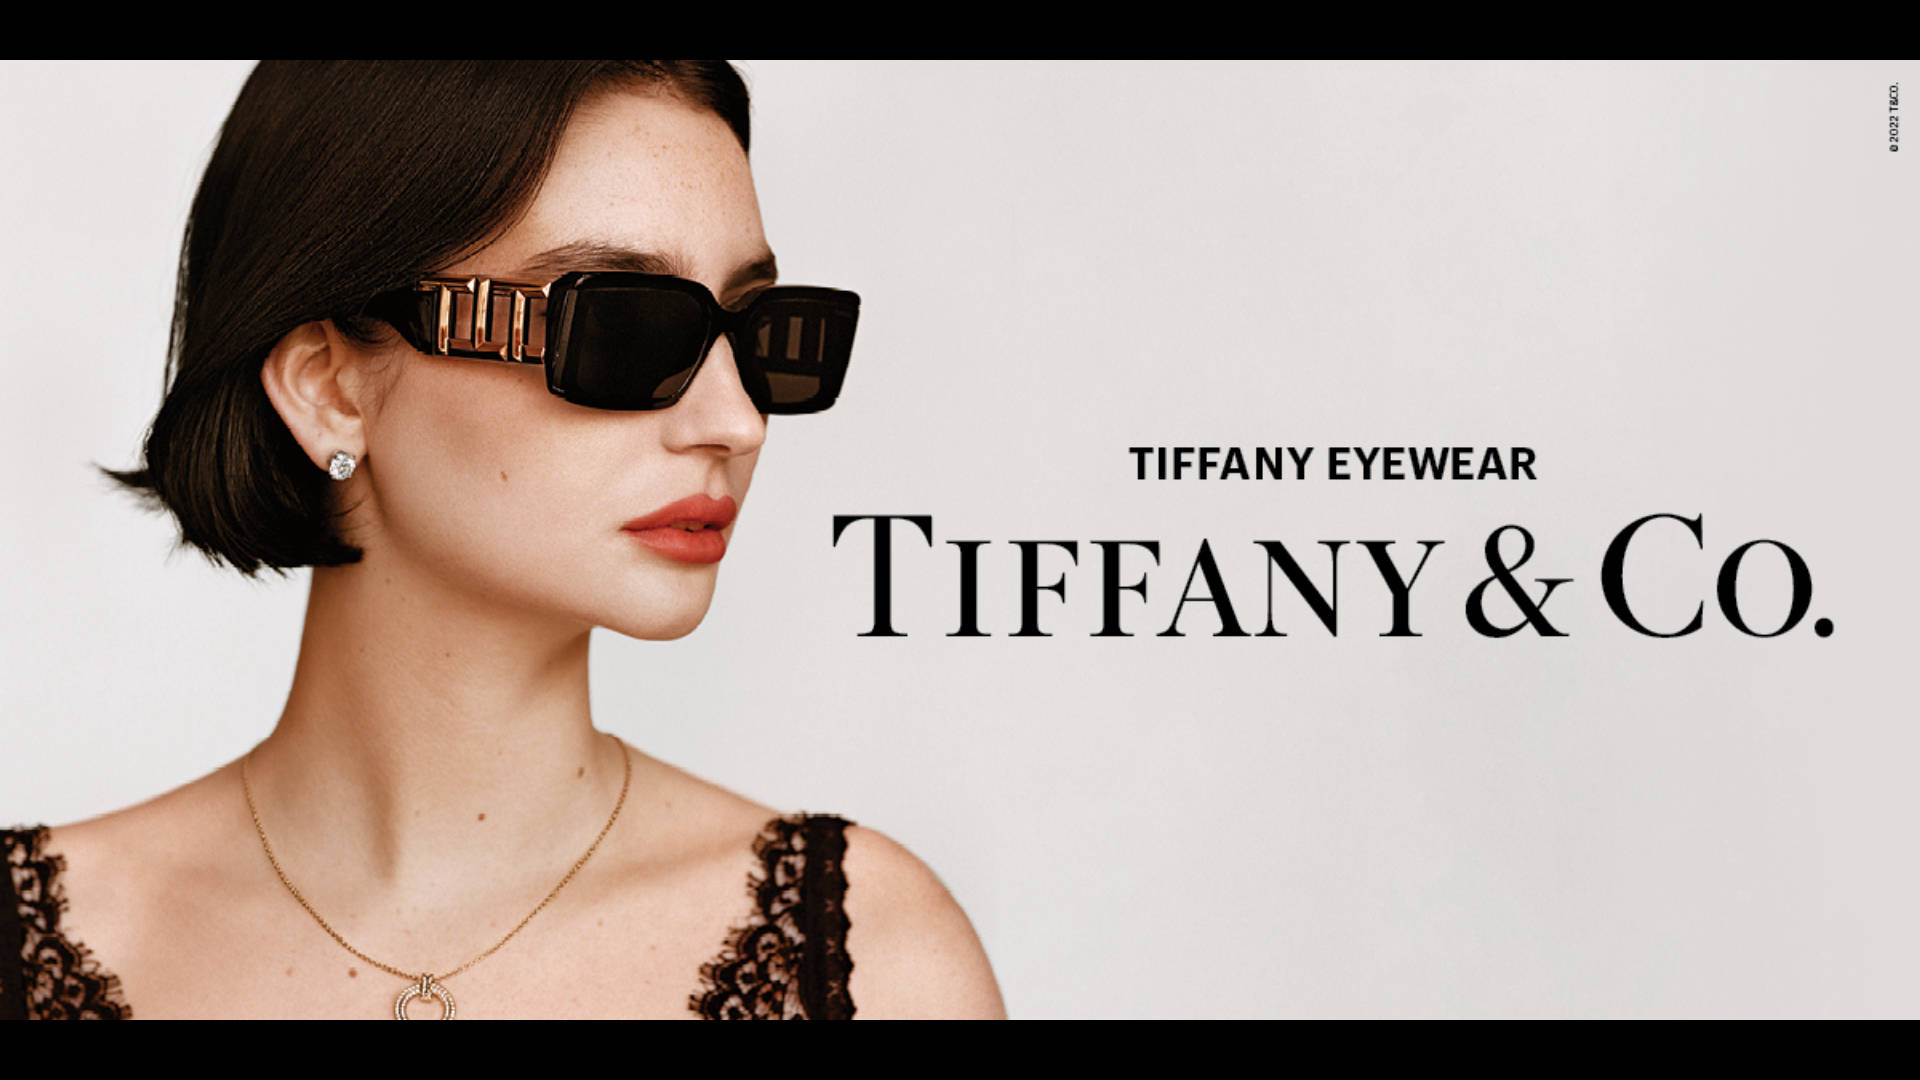 Caption: Elegance in Vision - Tiffany&Co. Eyewear Collection Wallpaper